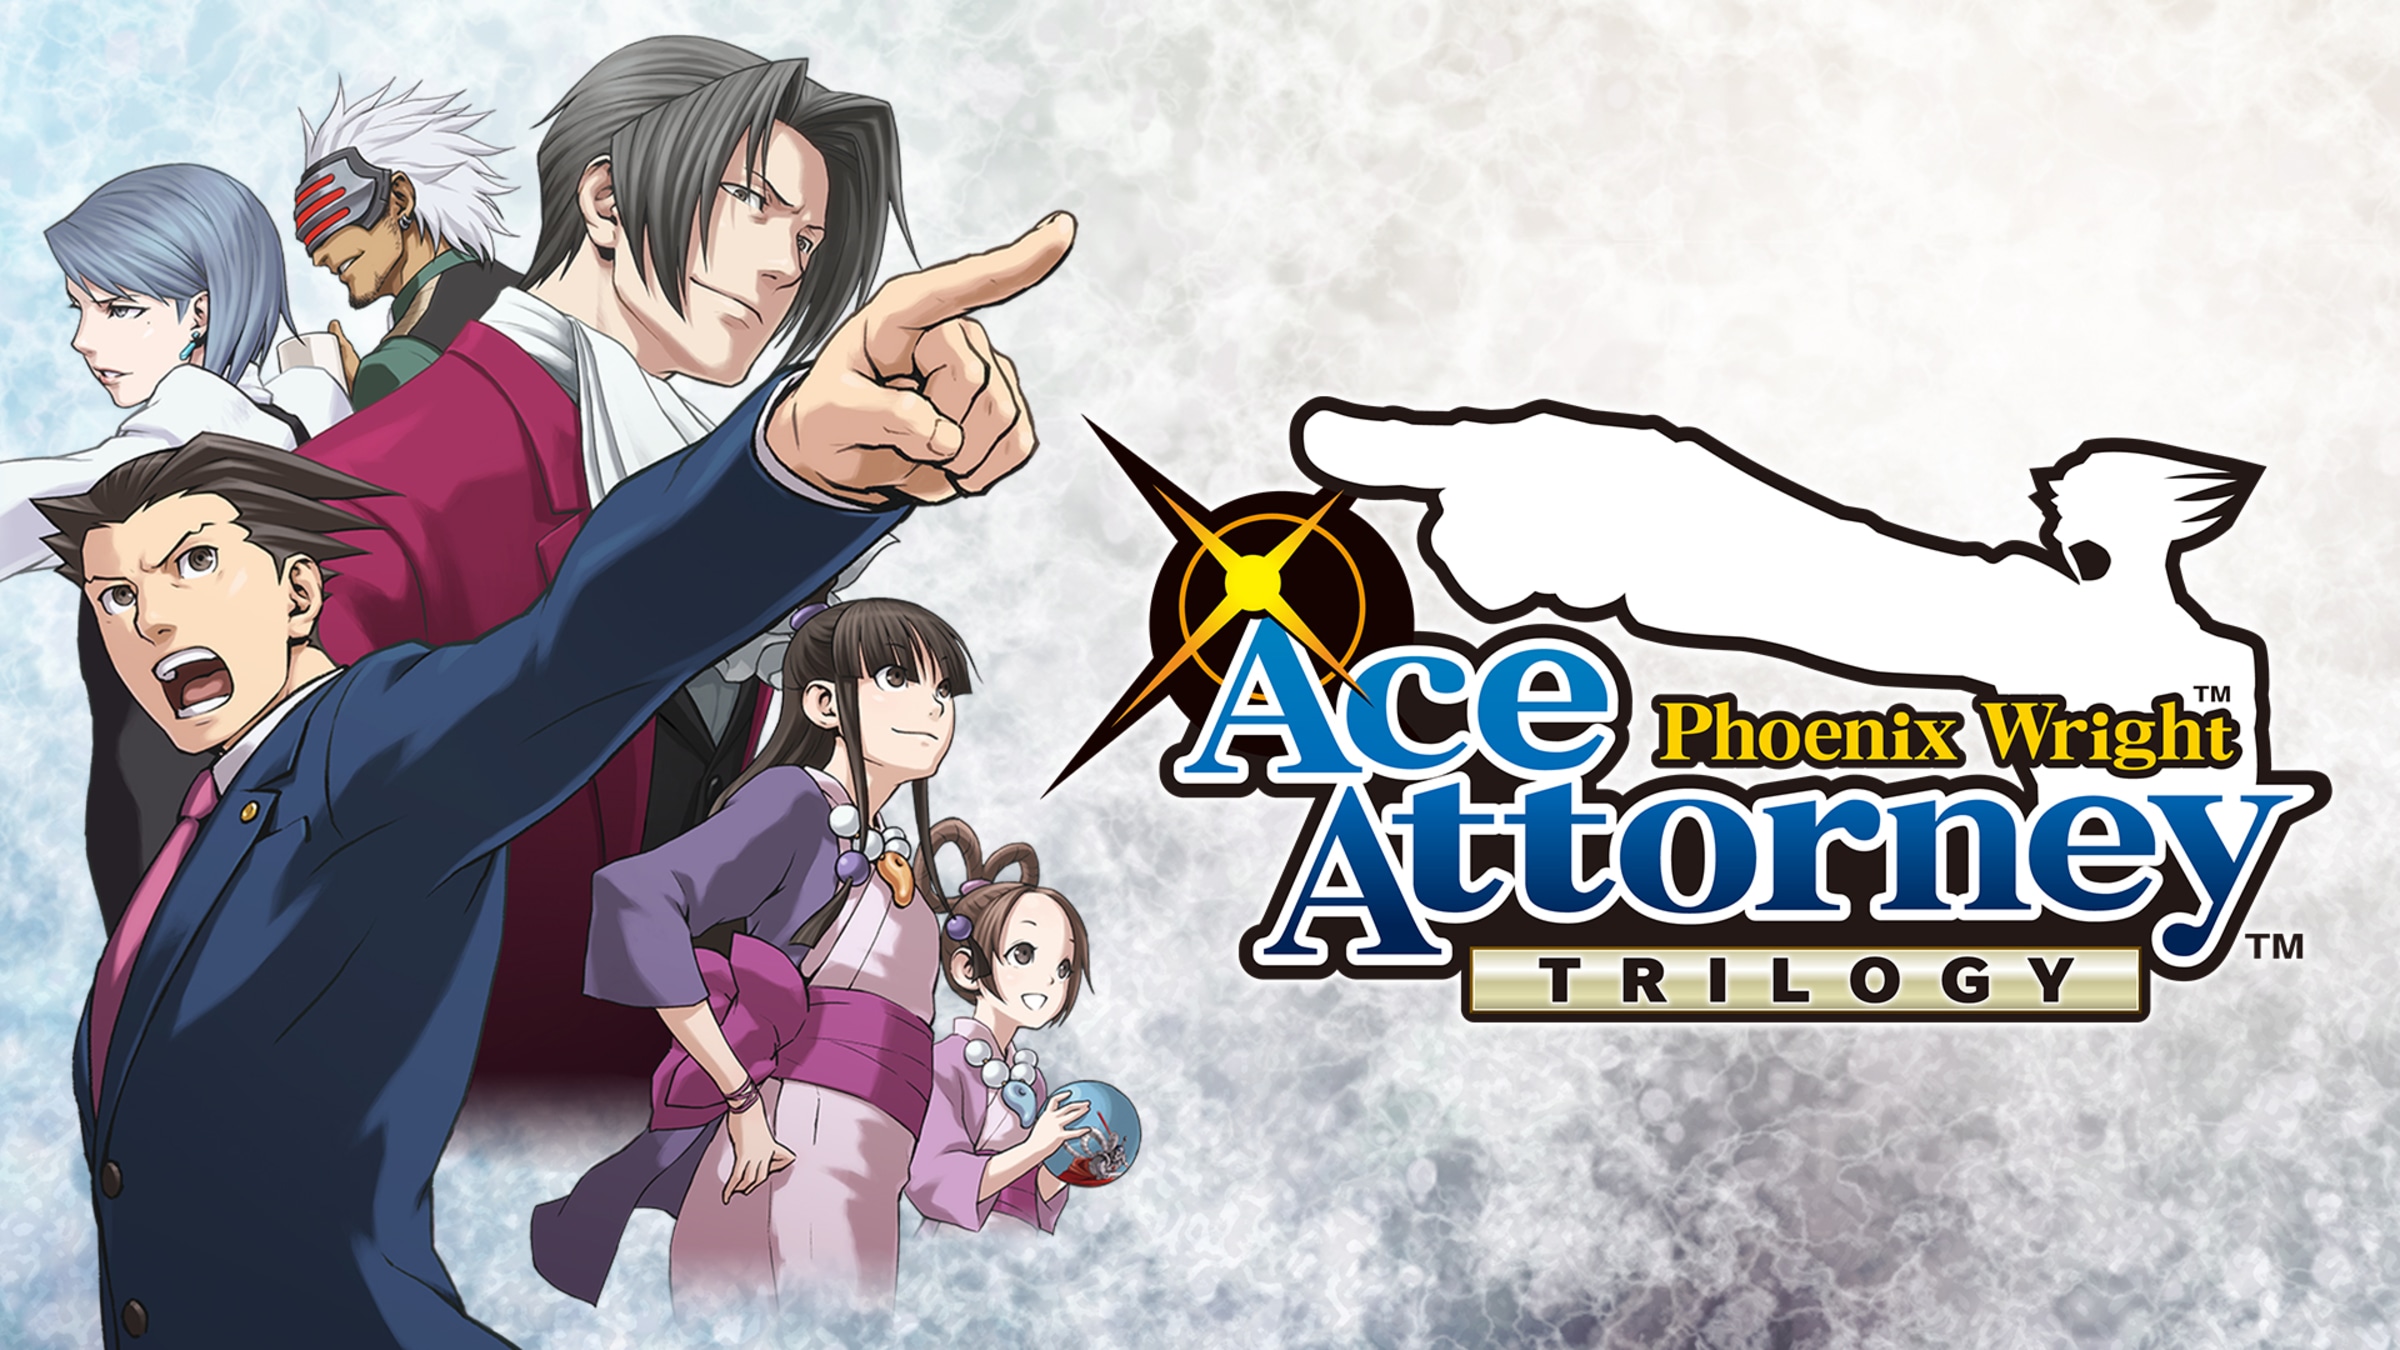 Phoenix wright ace attorney trilogy for switch